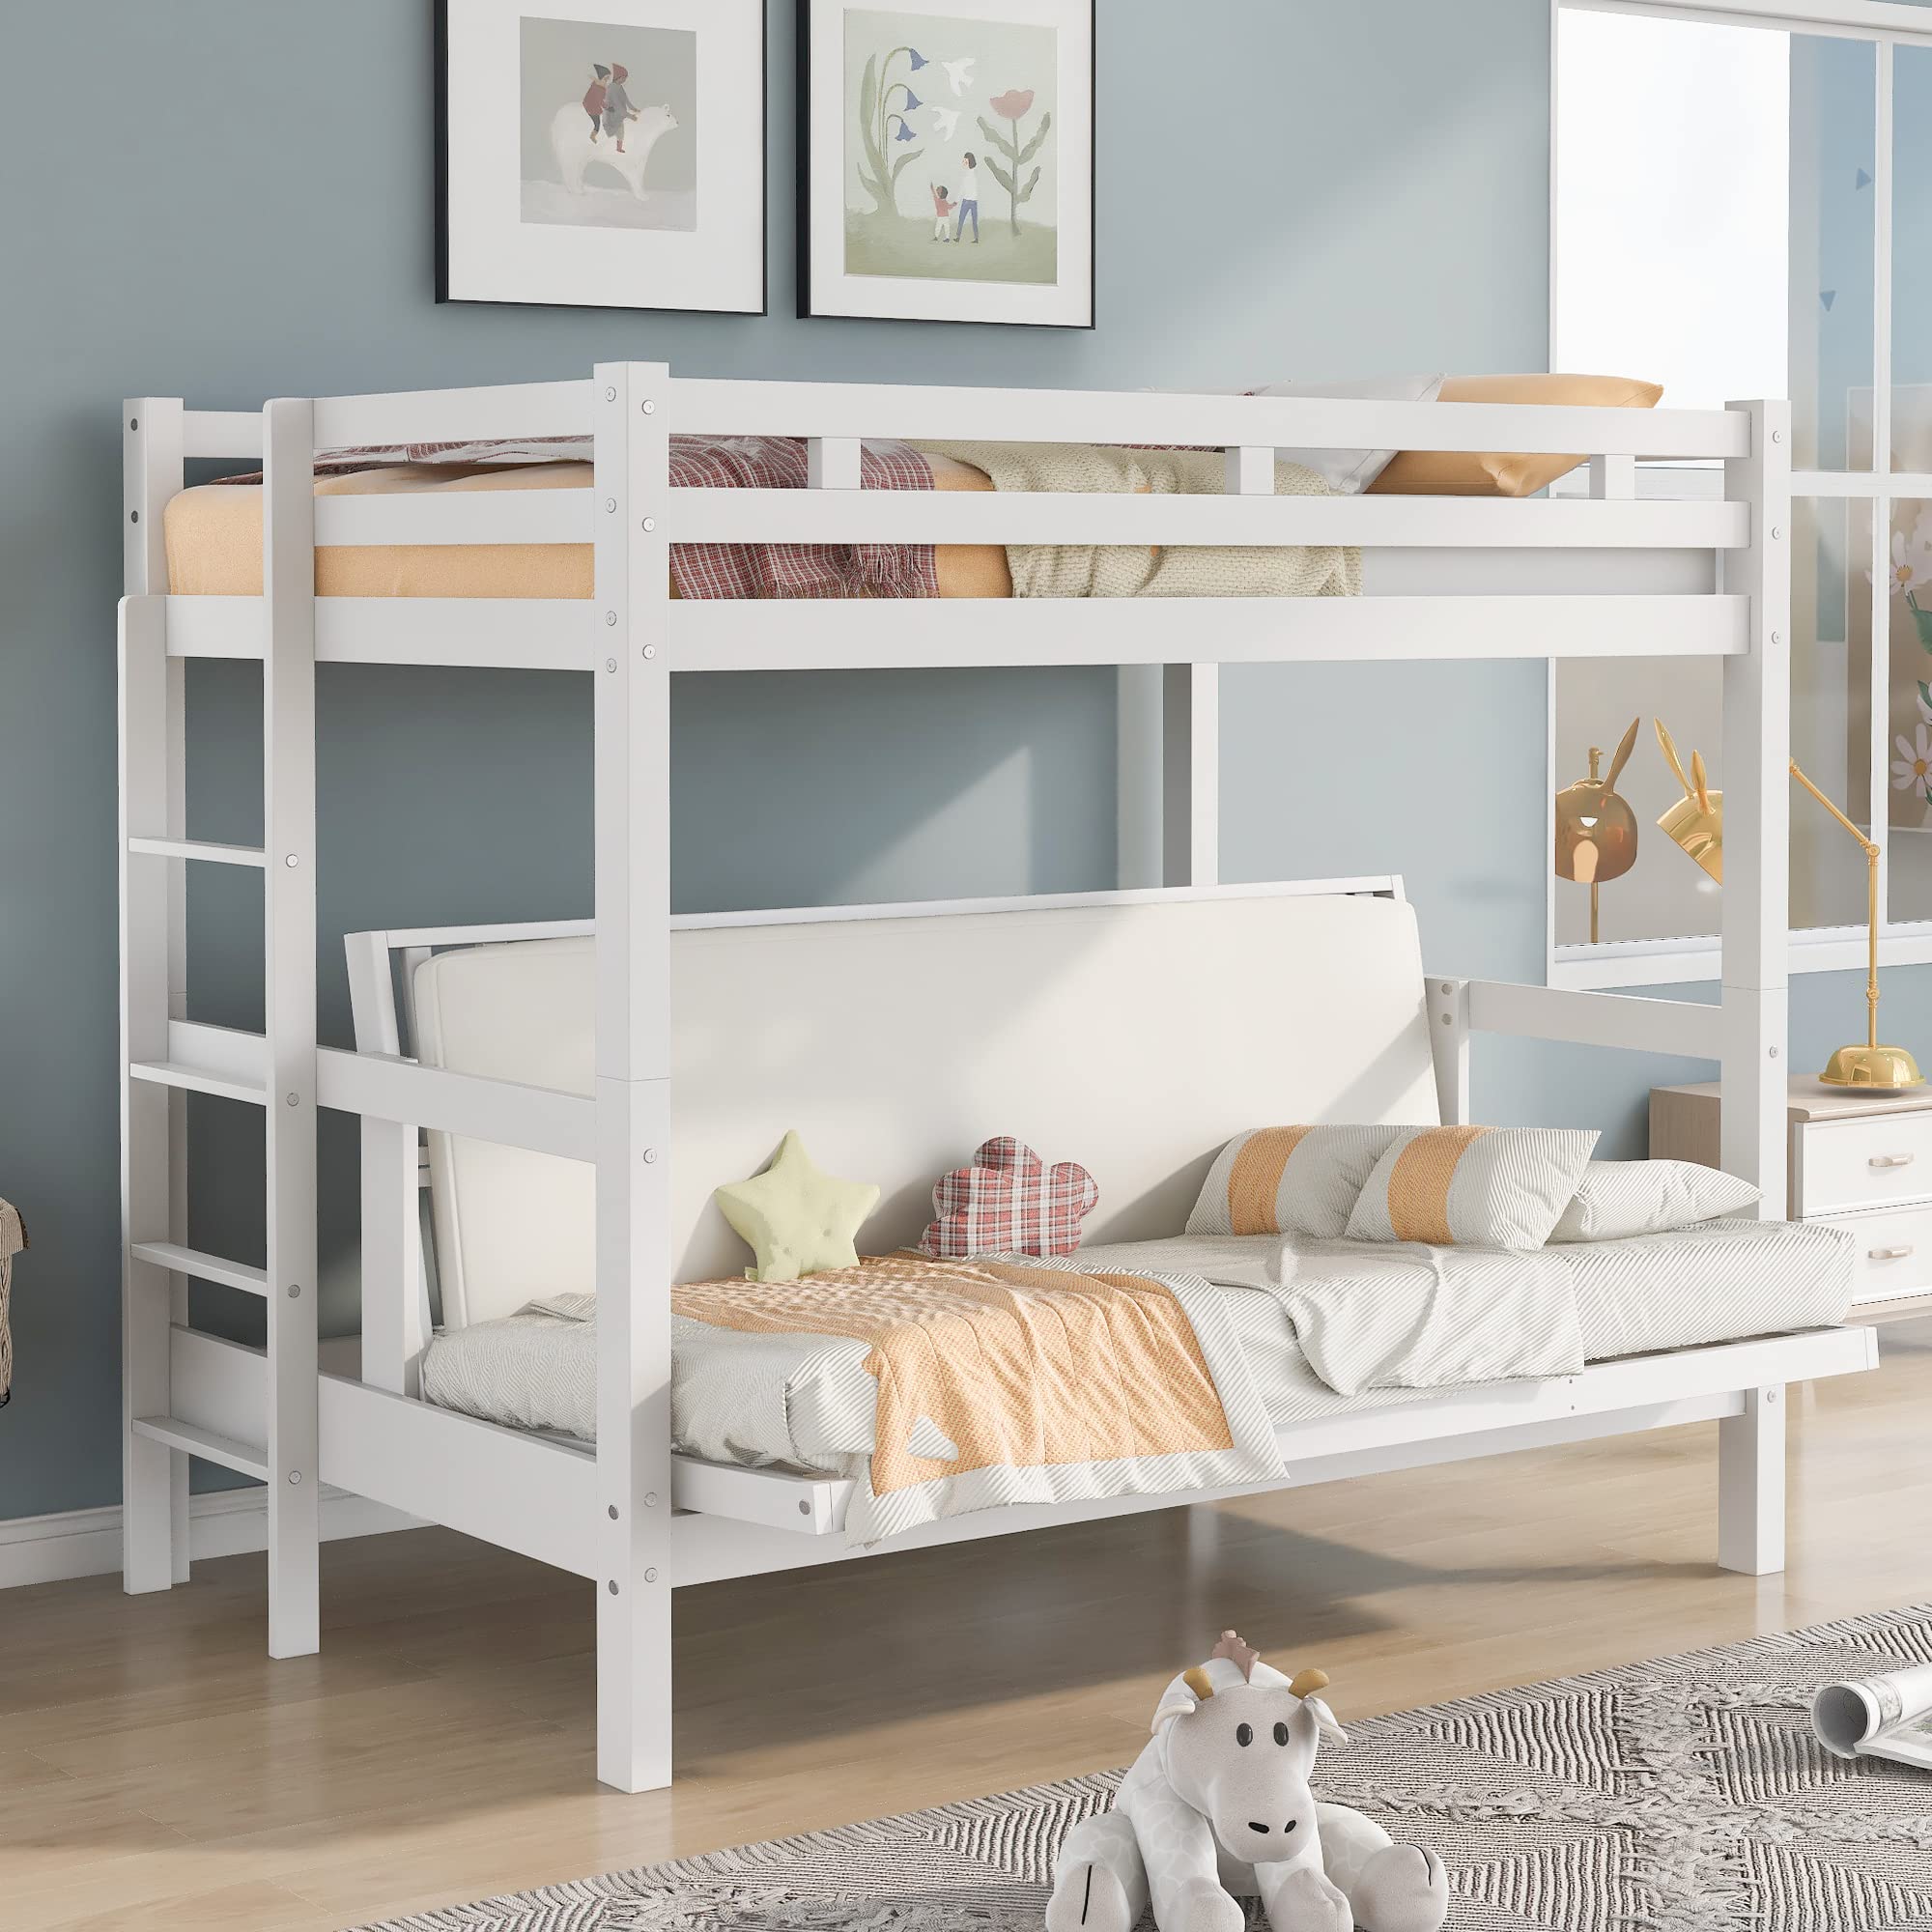 P PURLOVE Twin Over TwinFull convertible Bunk Bed Futon Sofa Bed Wood Bunk Bed Frame can be Devided into Twin Bed and a Daybed o